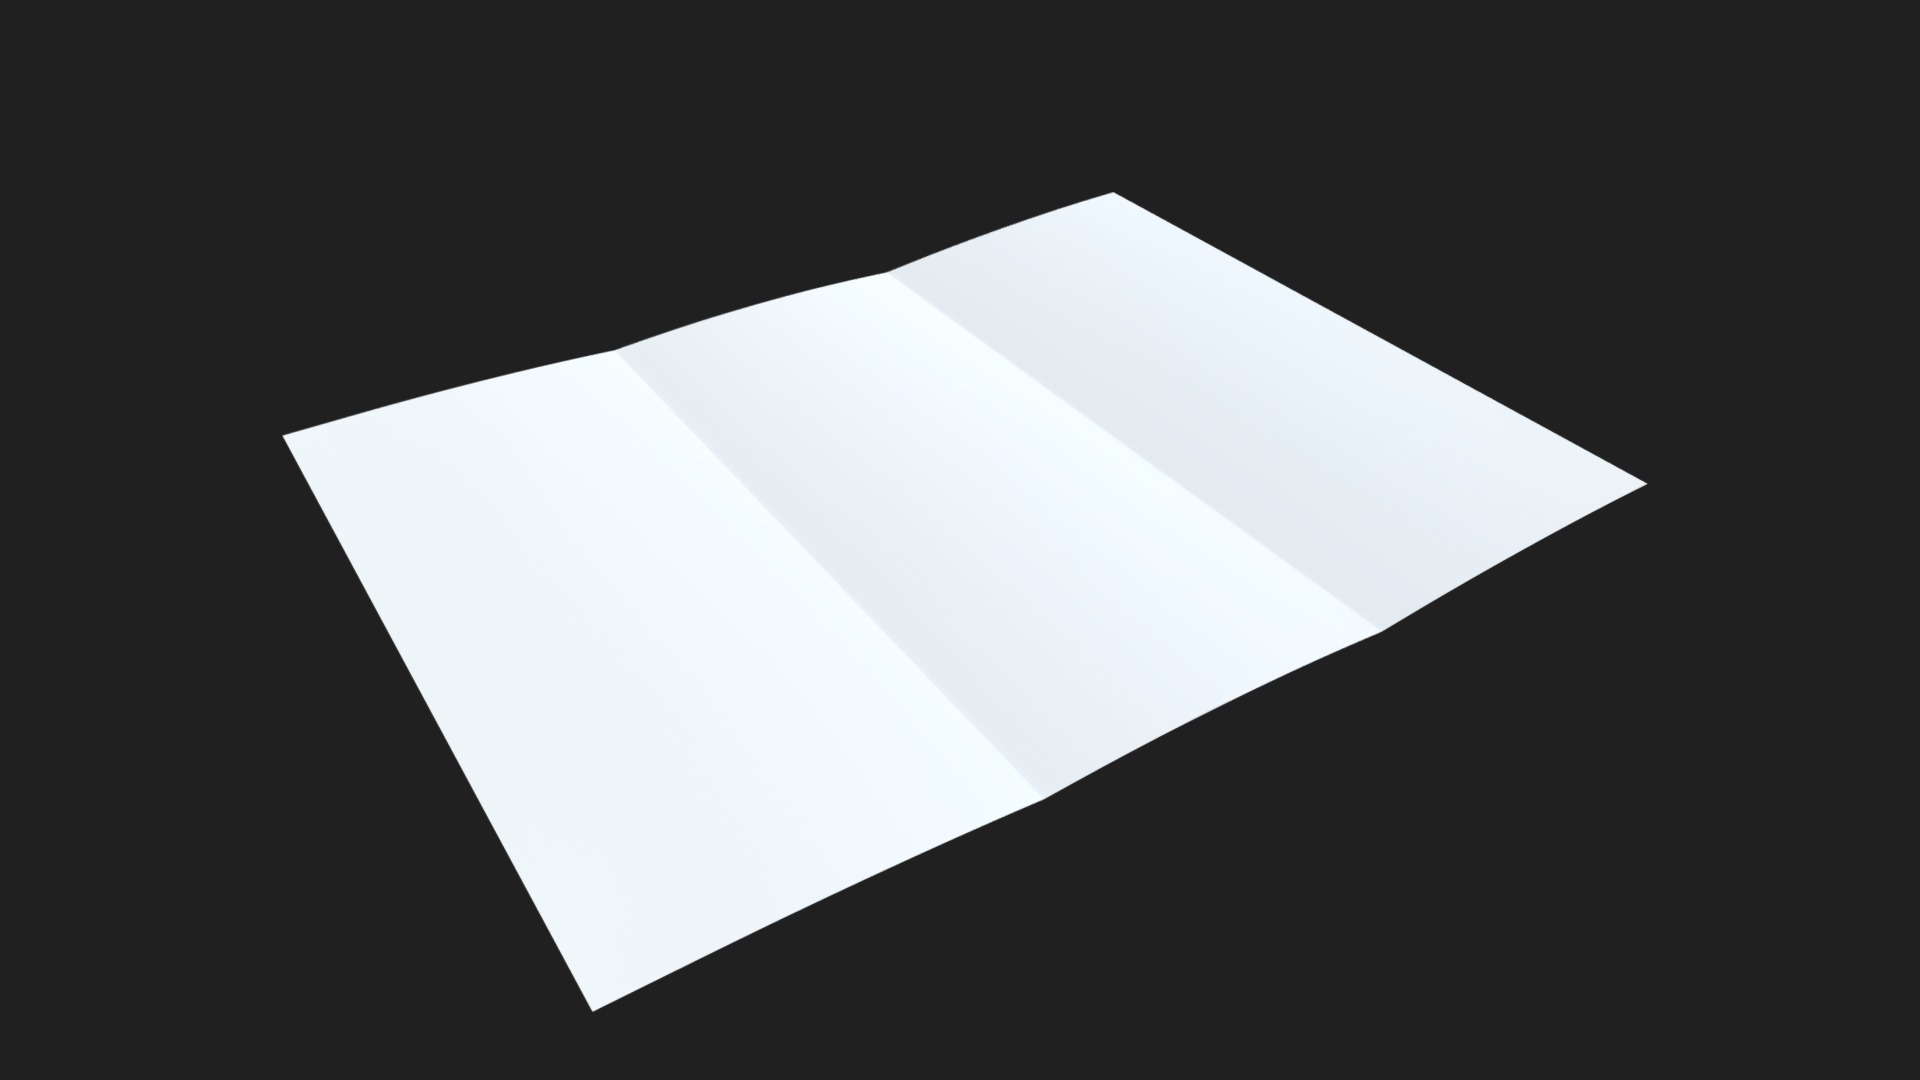 3D model Trifold mockup open - This is a 3D model of the Trifold mockup open. The 3D model is about a white rectangle with a black background.